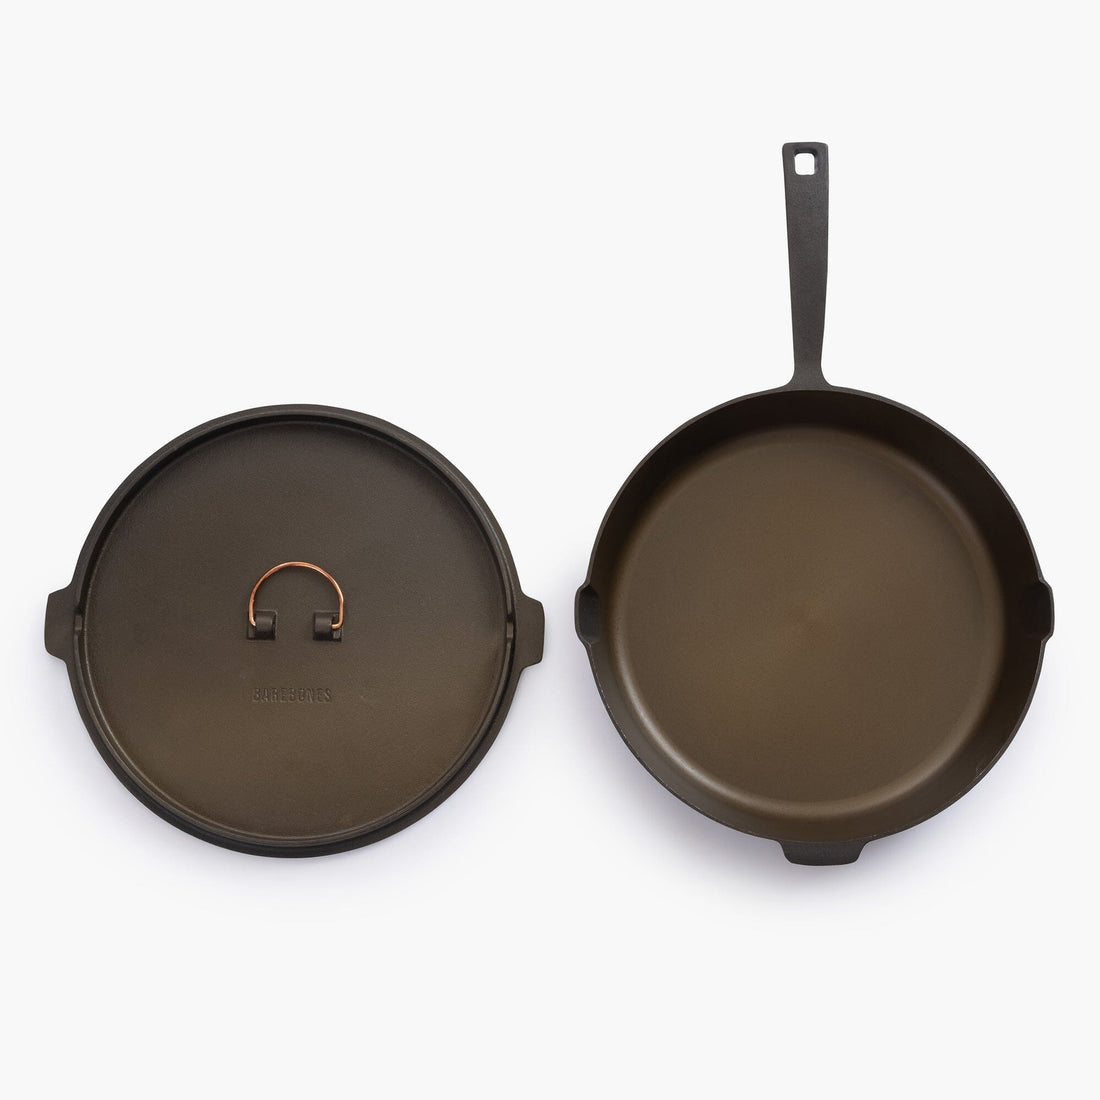 All-In-One Cast Iron Skillet Bundle